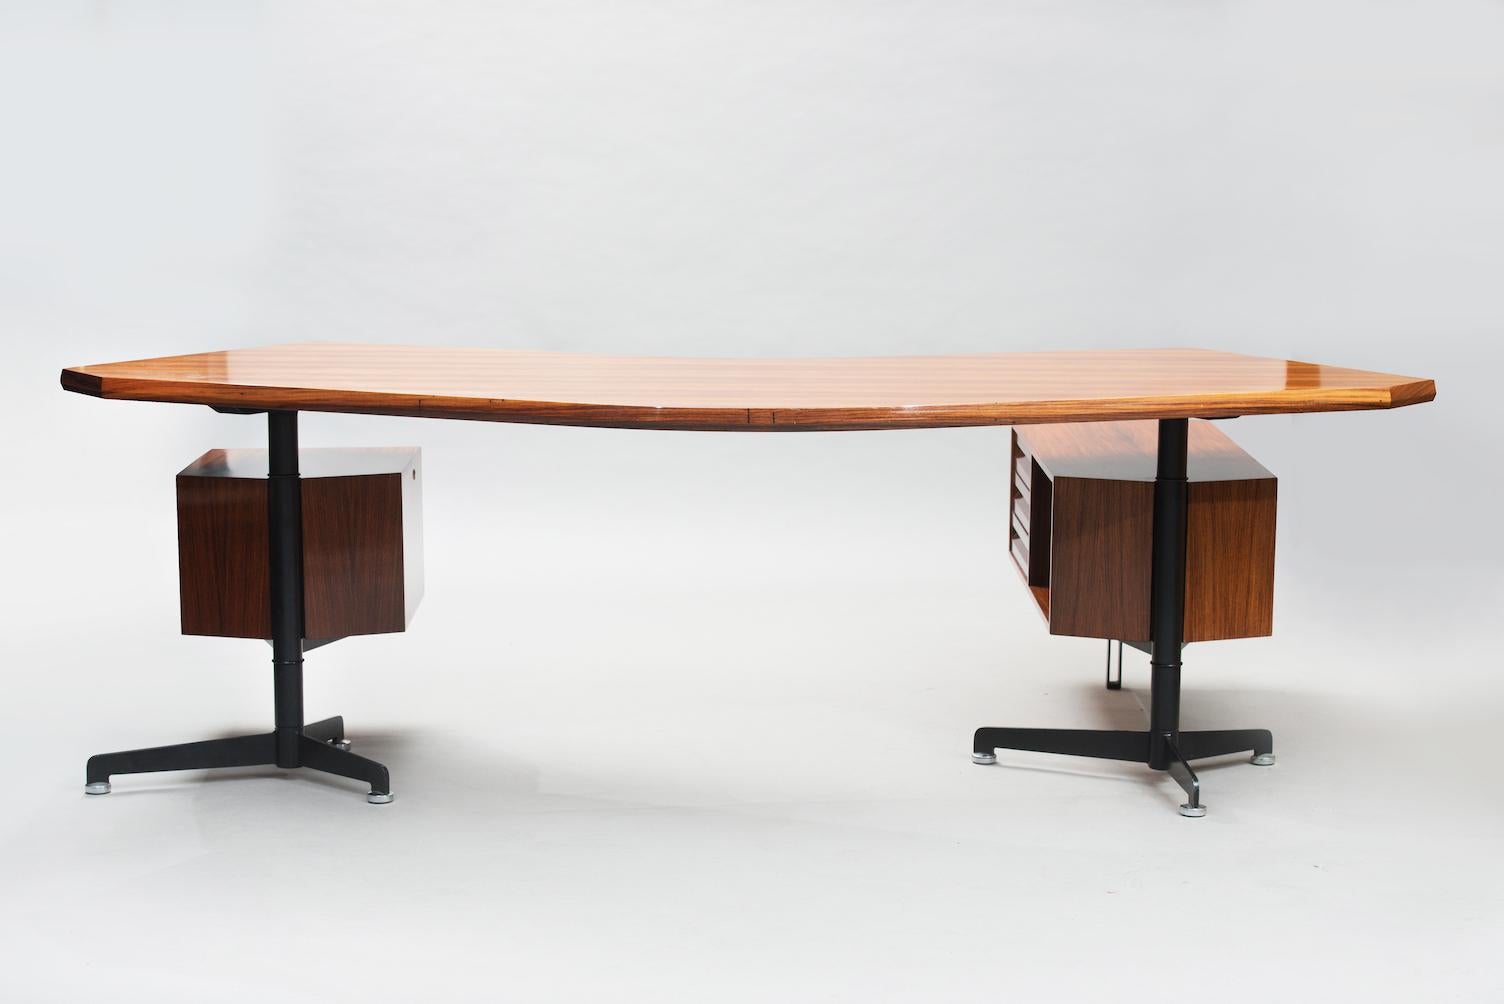 Boomerang executive desk model T96 designed by Osvaldo Borsani in 1956 for Tecno, Italy.
Rosewood and black enameled steel bases. The drawer units can rotate 360º to adopt different positions.